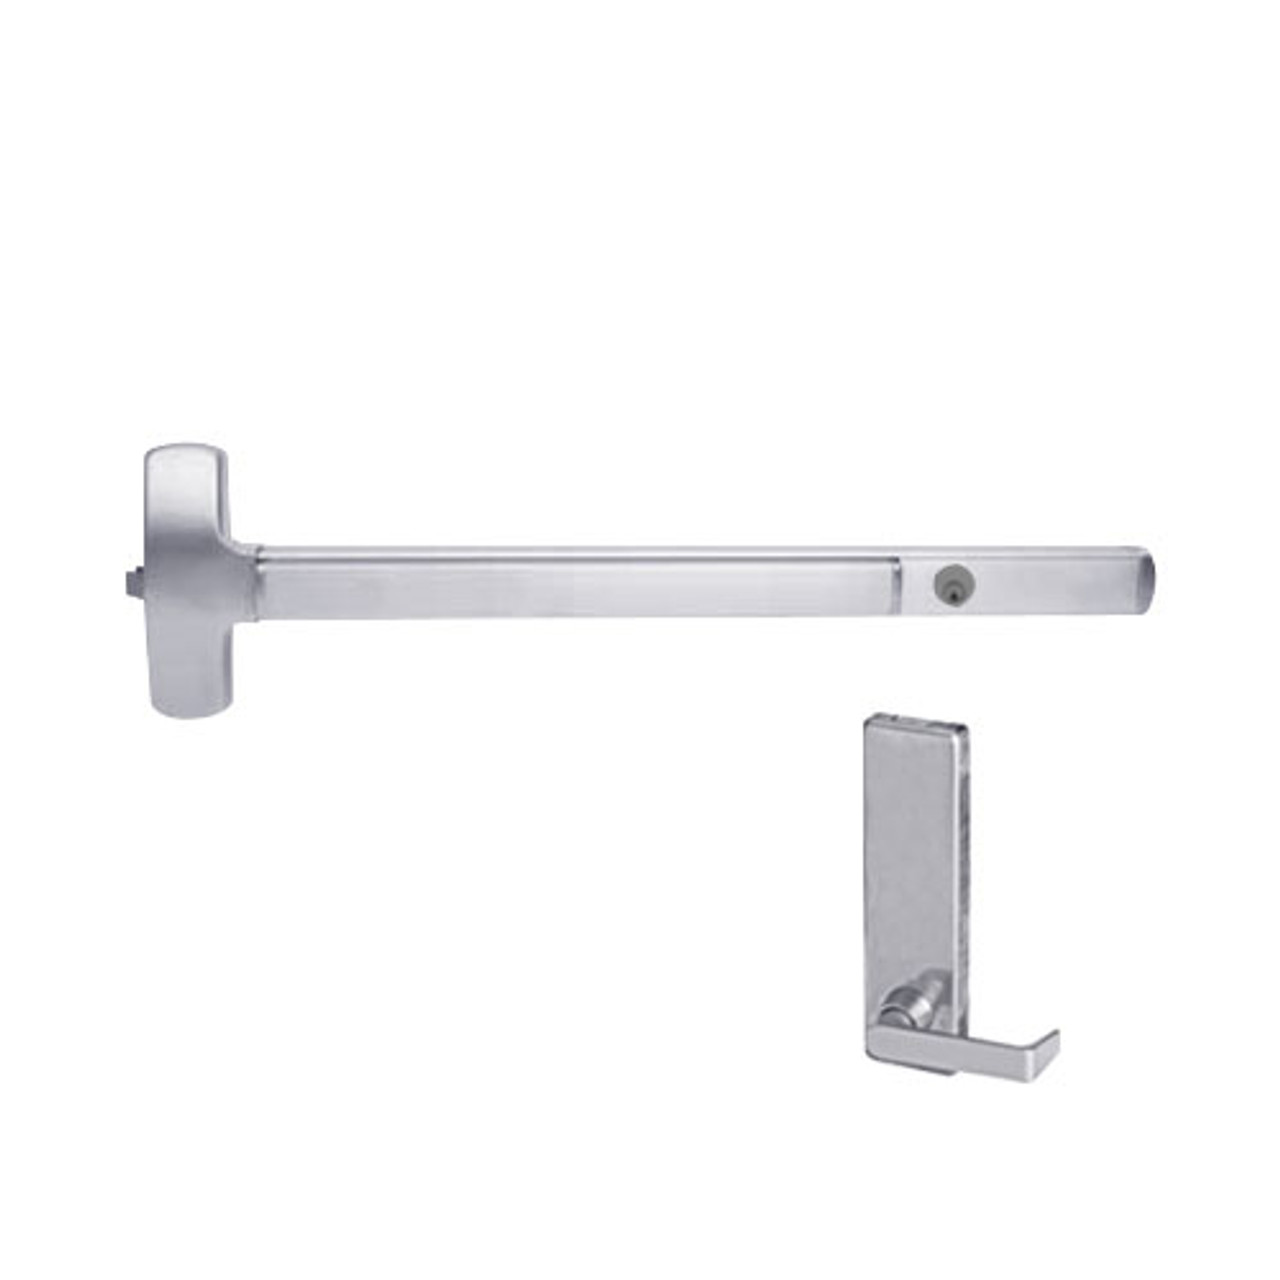 CD25-R-L-BE-DANE-US26-3-LHR Falcon Exit Device in Polished Chrome